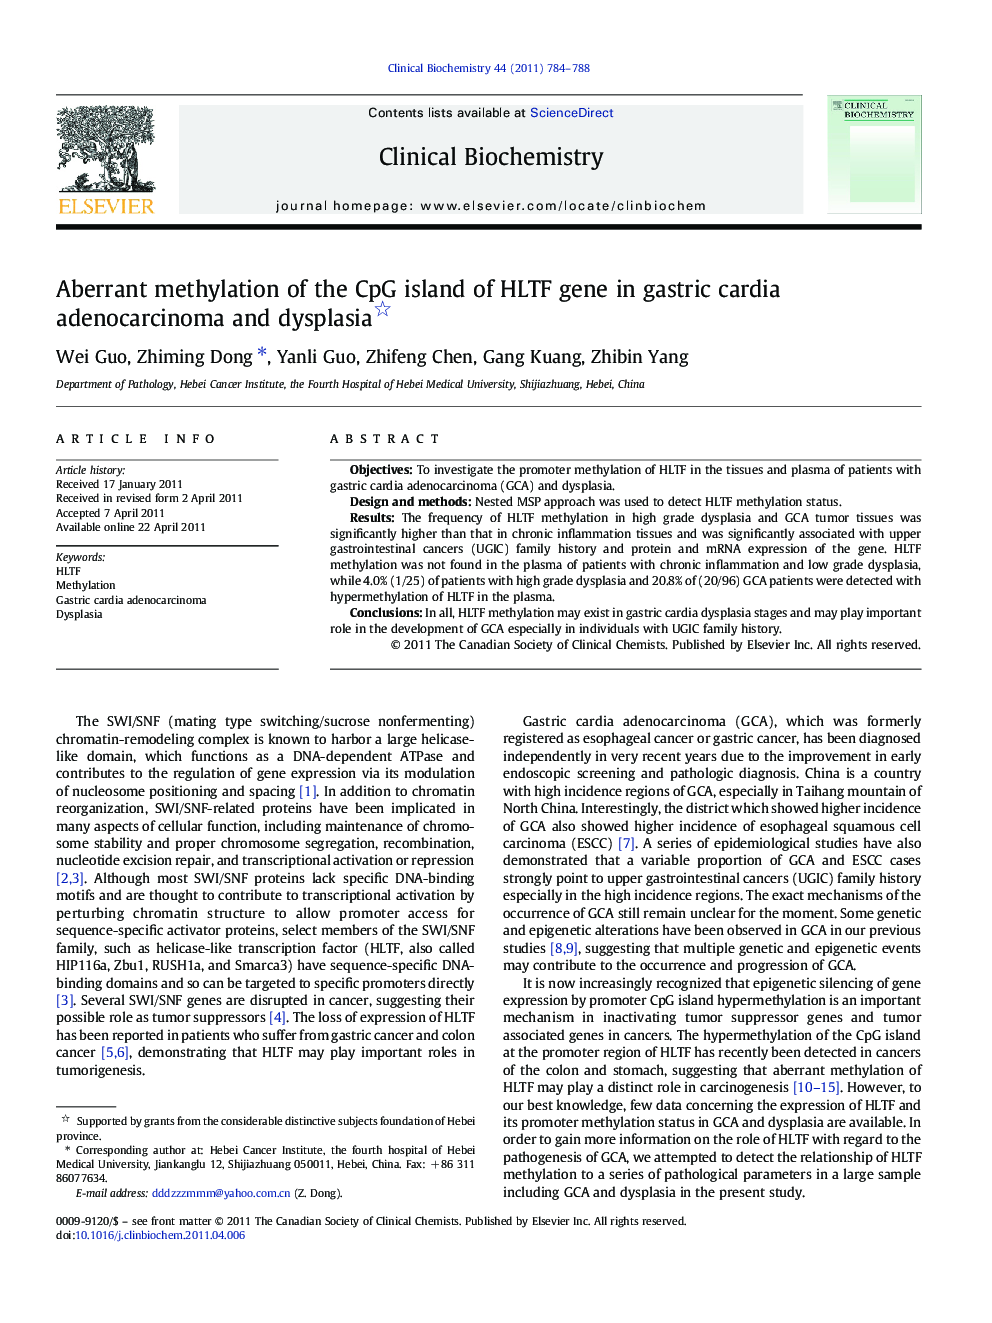 Aberrant methylation of the CpG island of HLTF gene in gastric cardia adenocarcinoma and dysplasia 